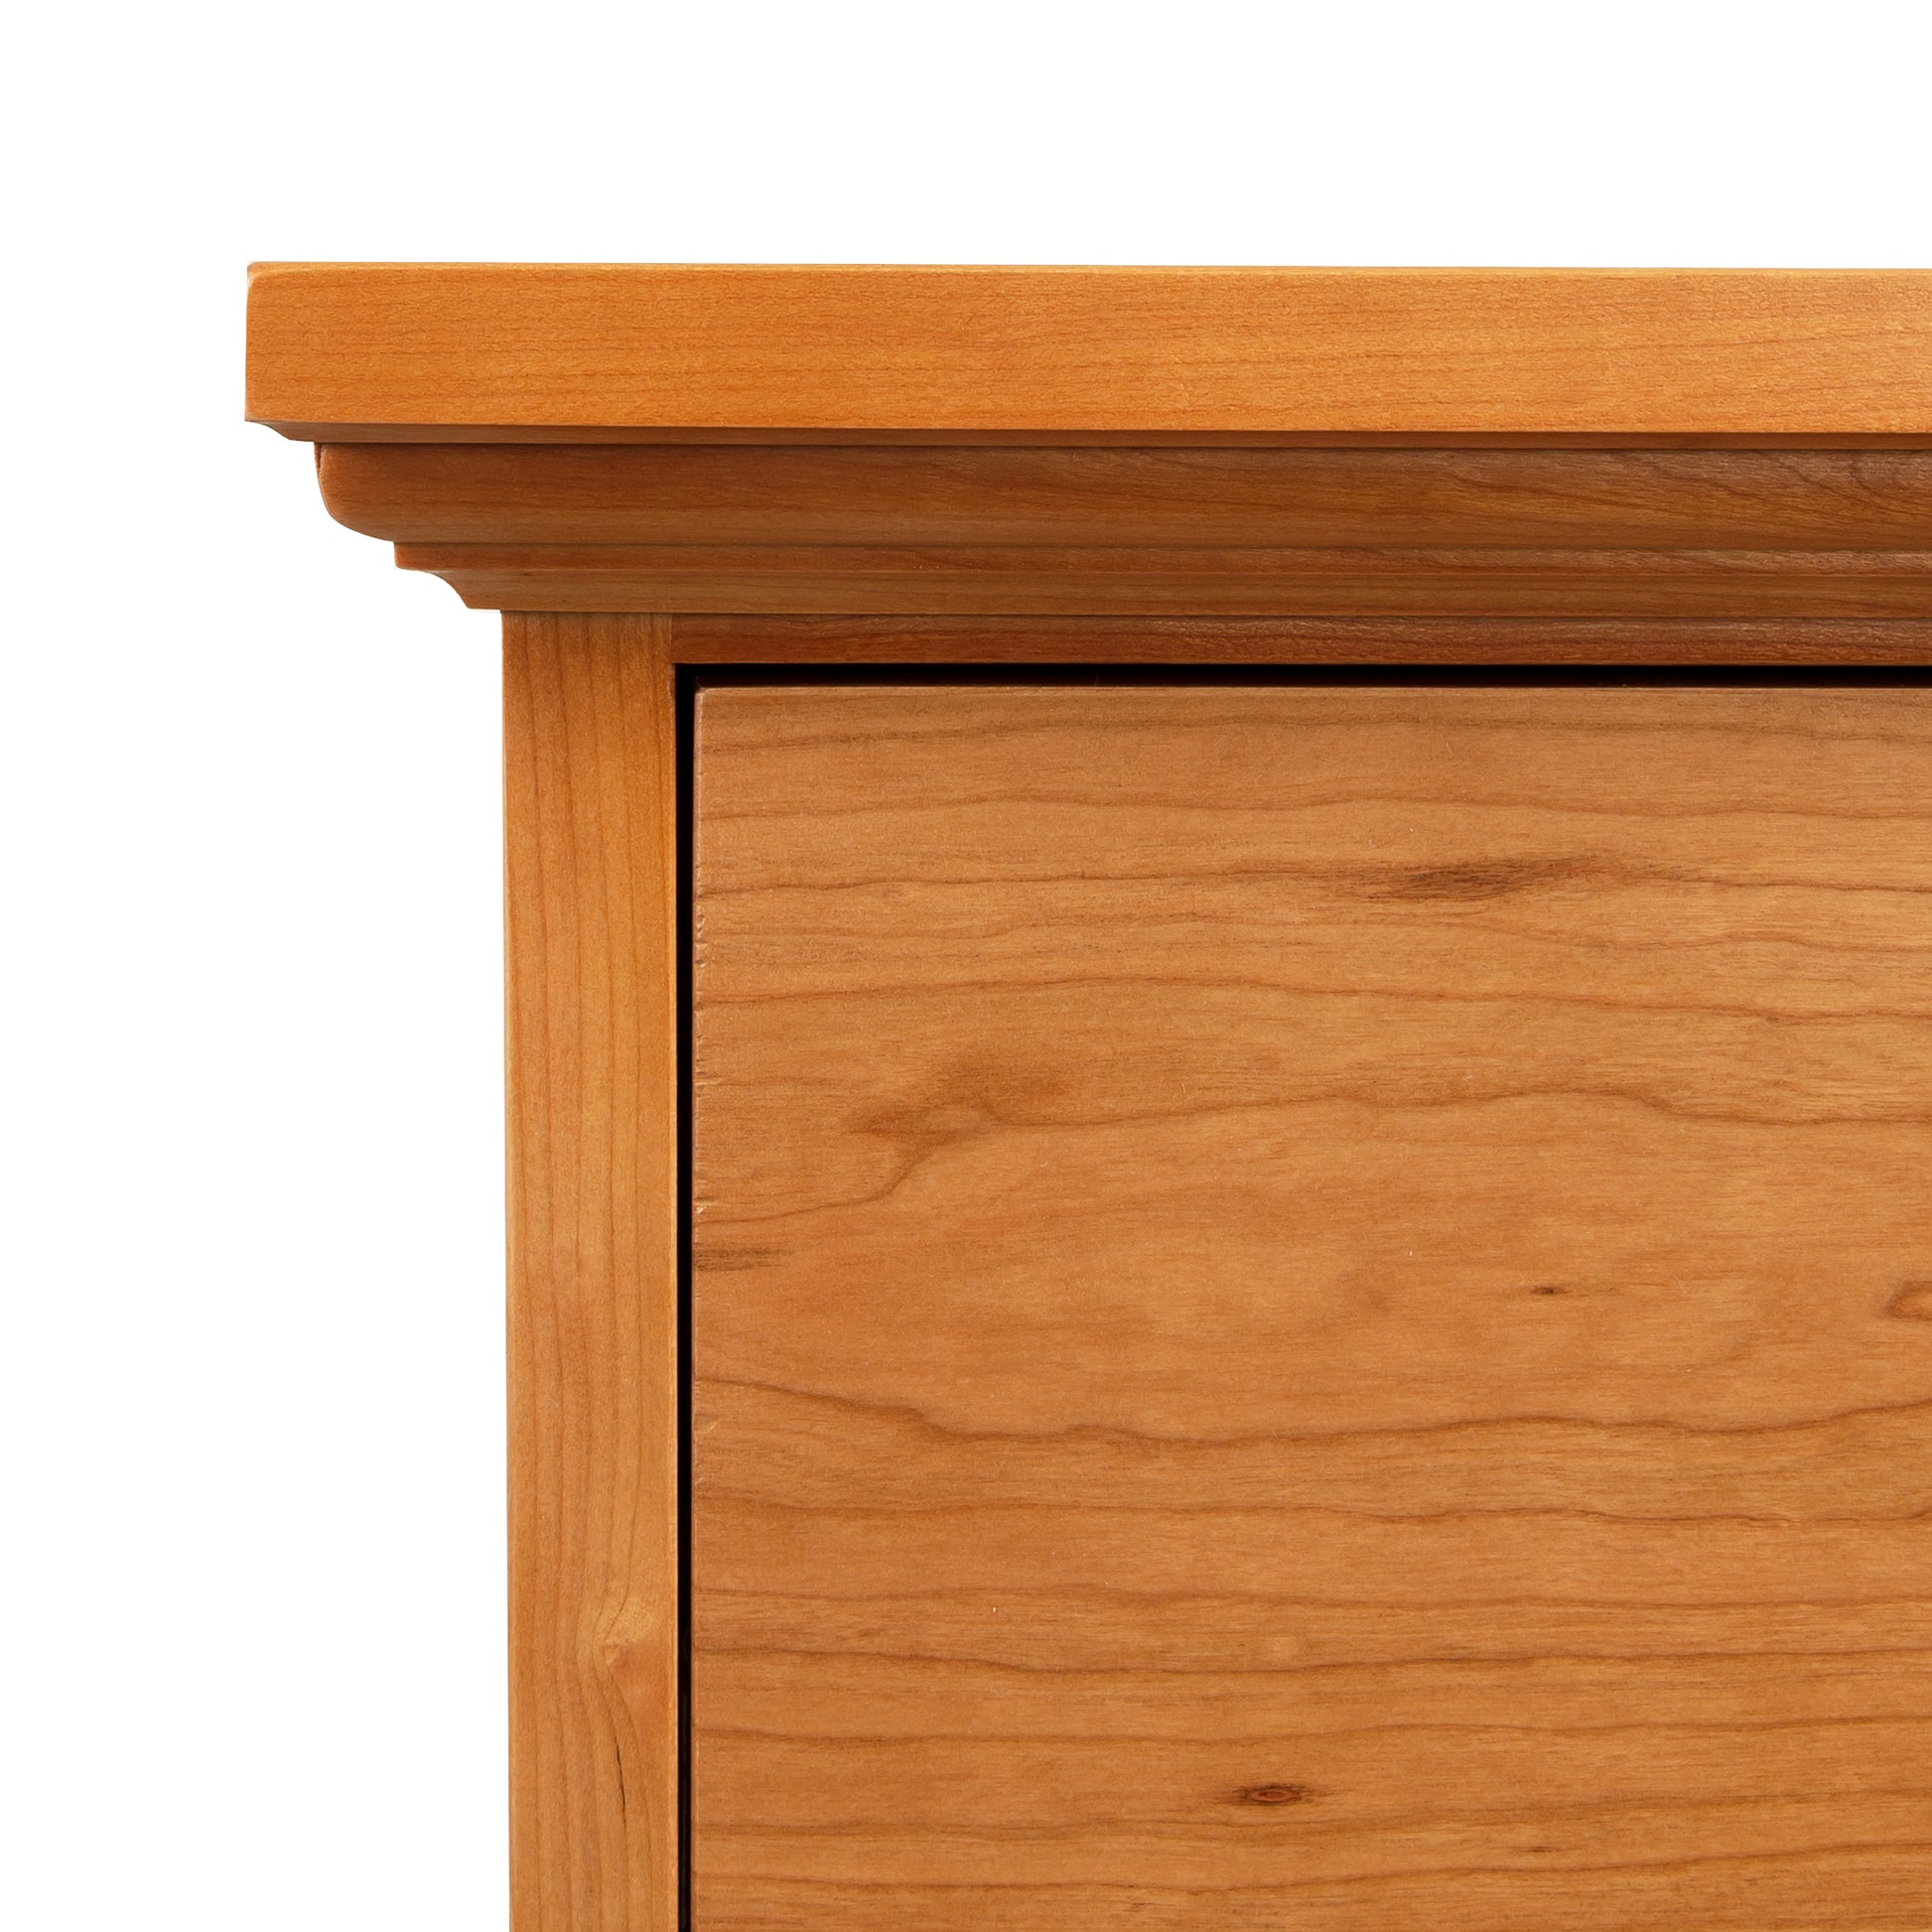 A close up of the top of a wooden dresser.